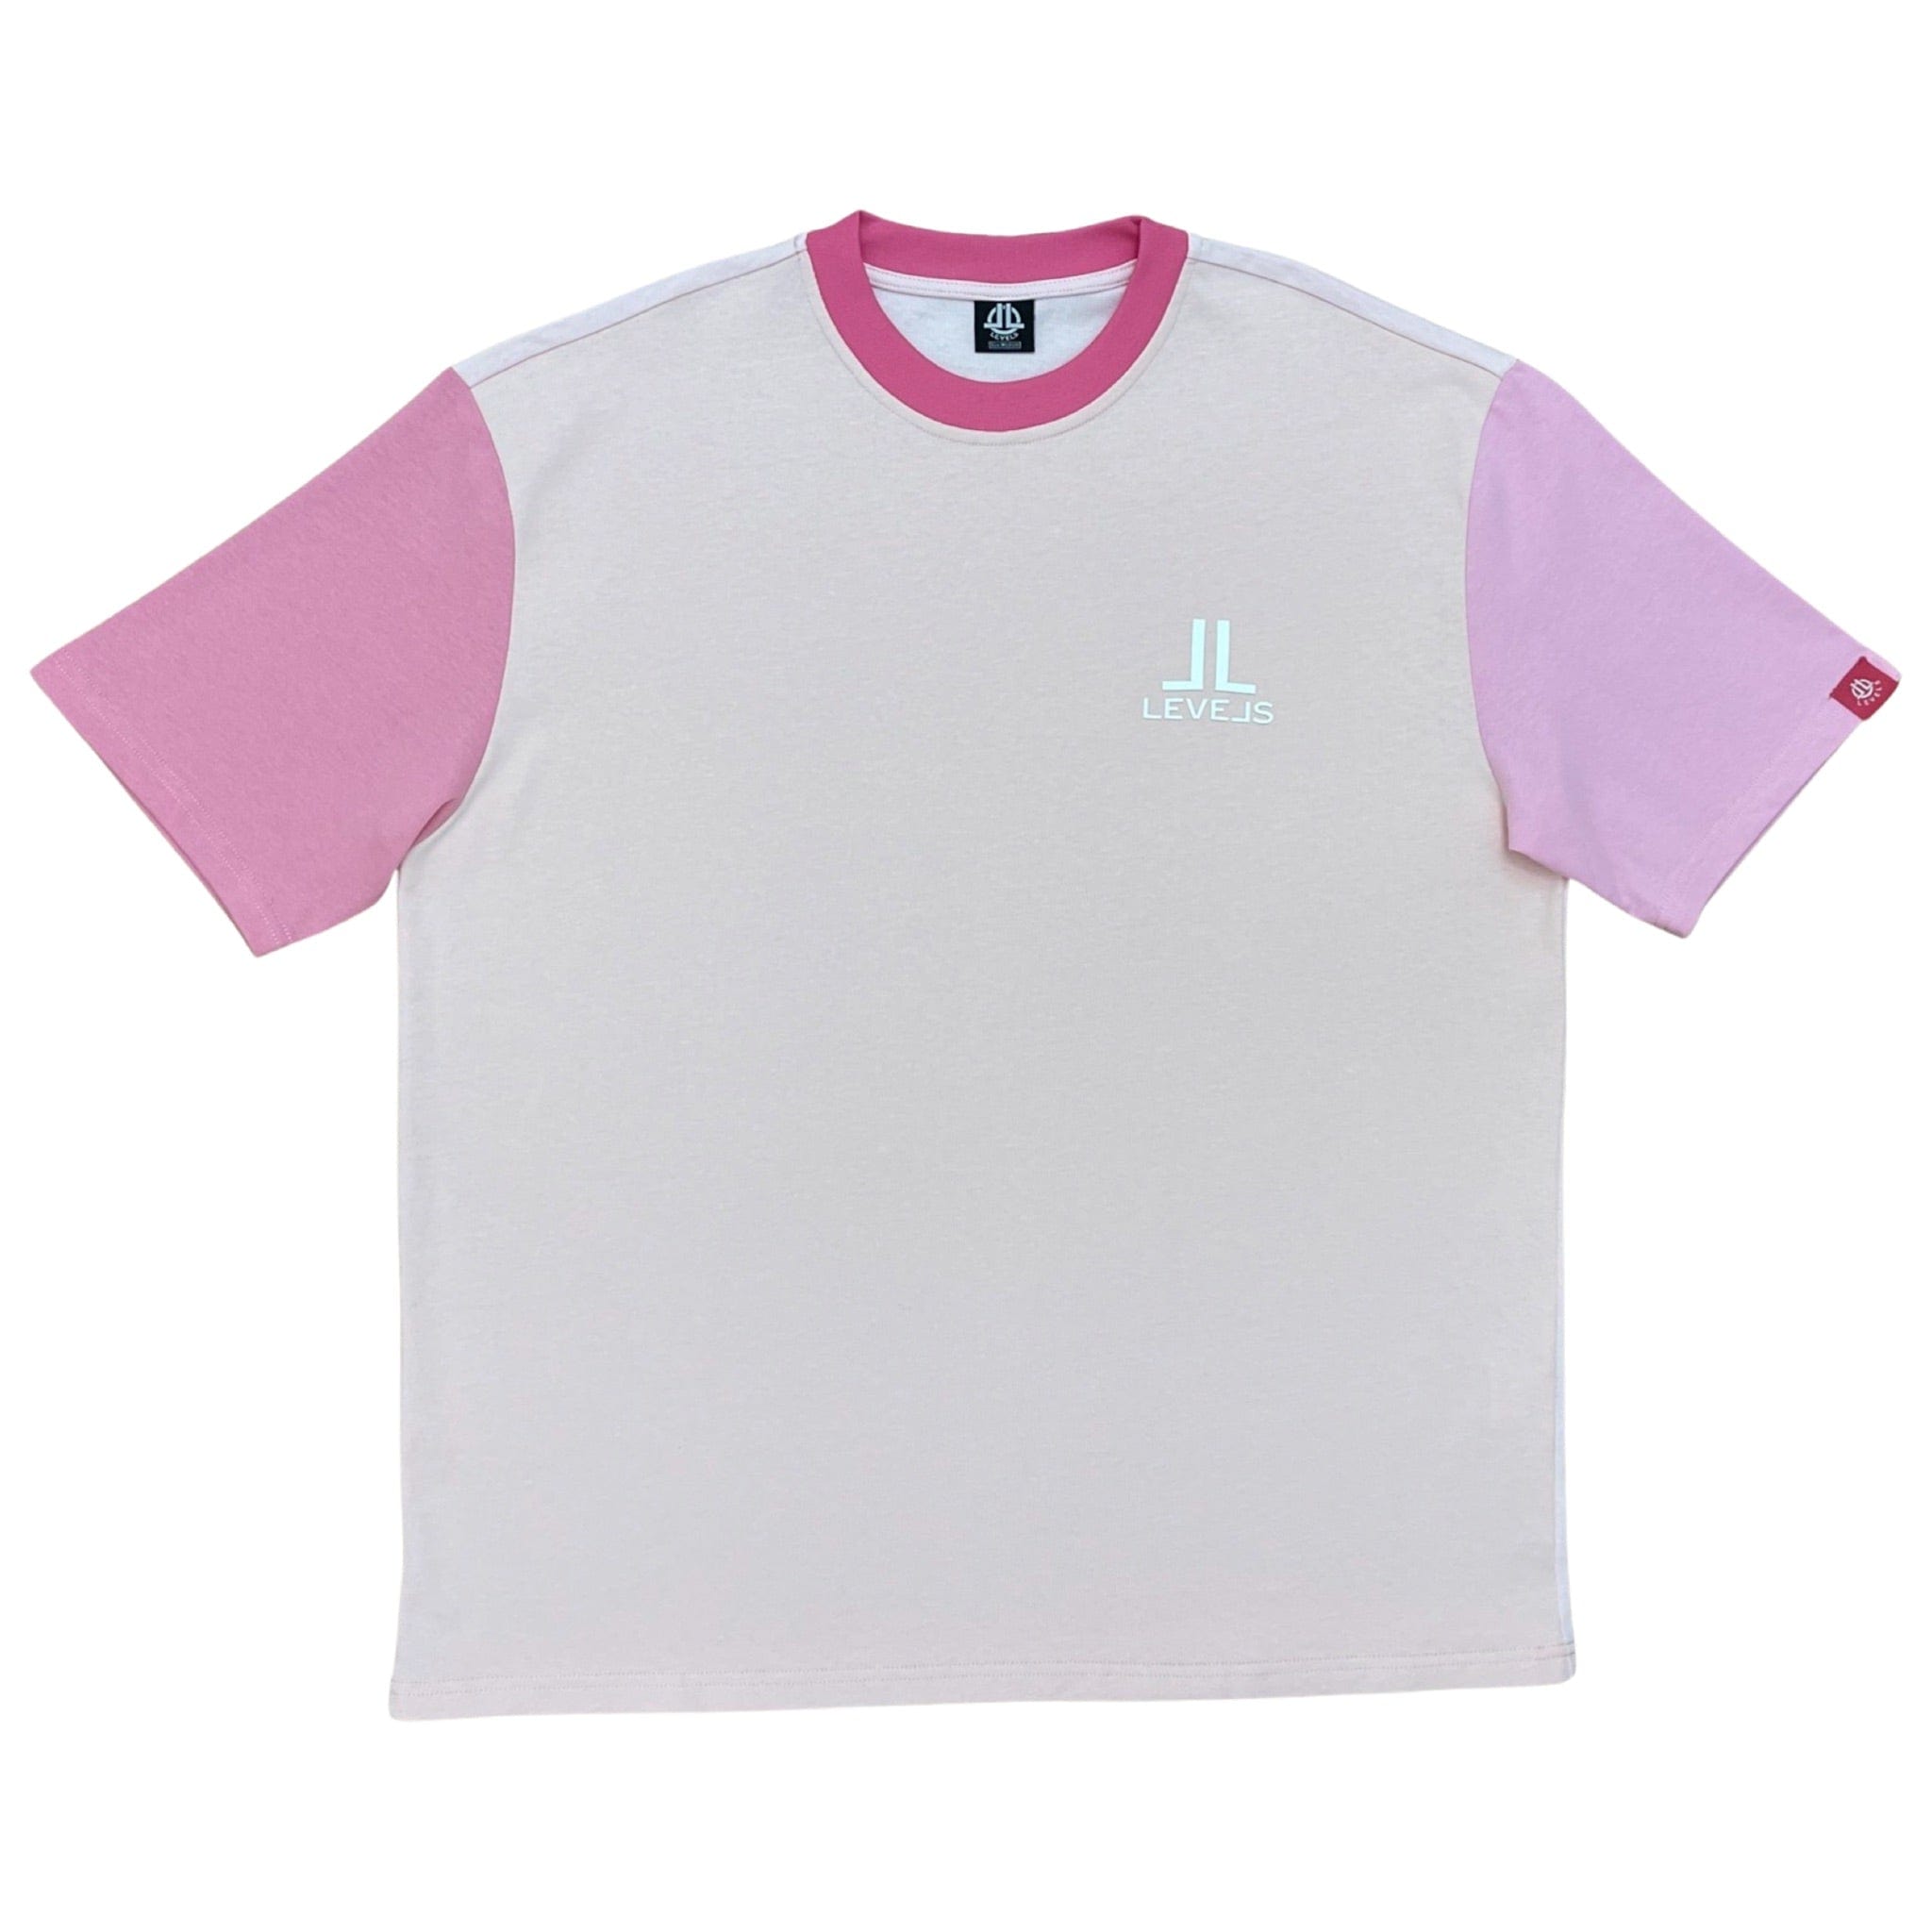 LEVELS, LLC Apparel & Accessories LUXE LEVELS OVERSIZED TEE (PINK PANTHER)